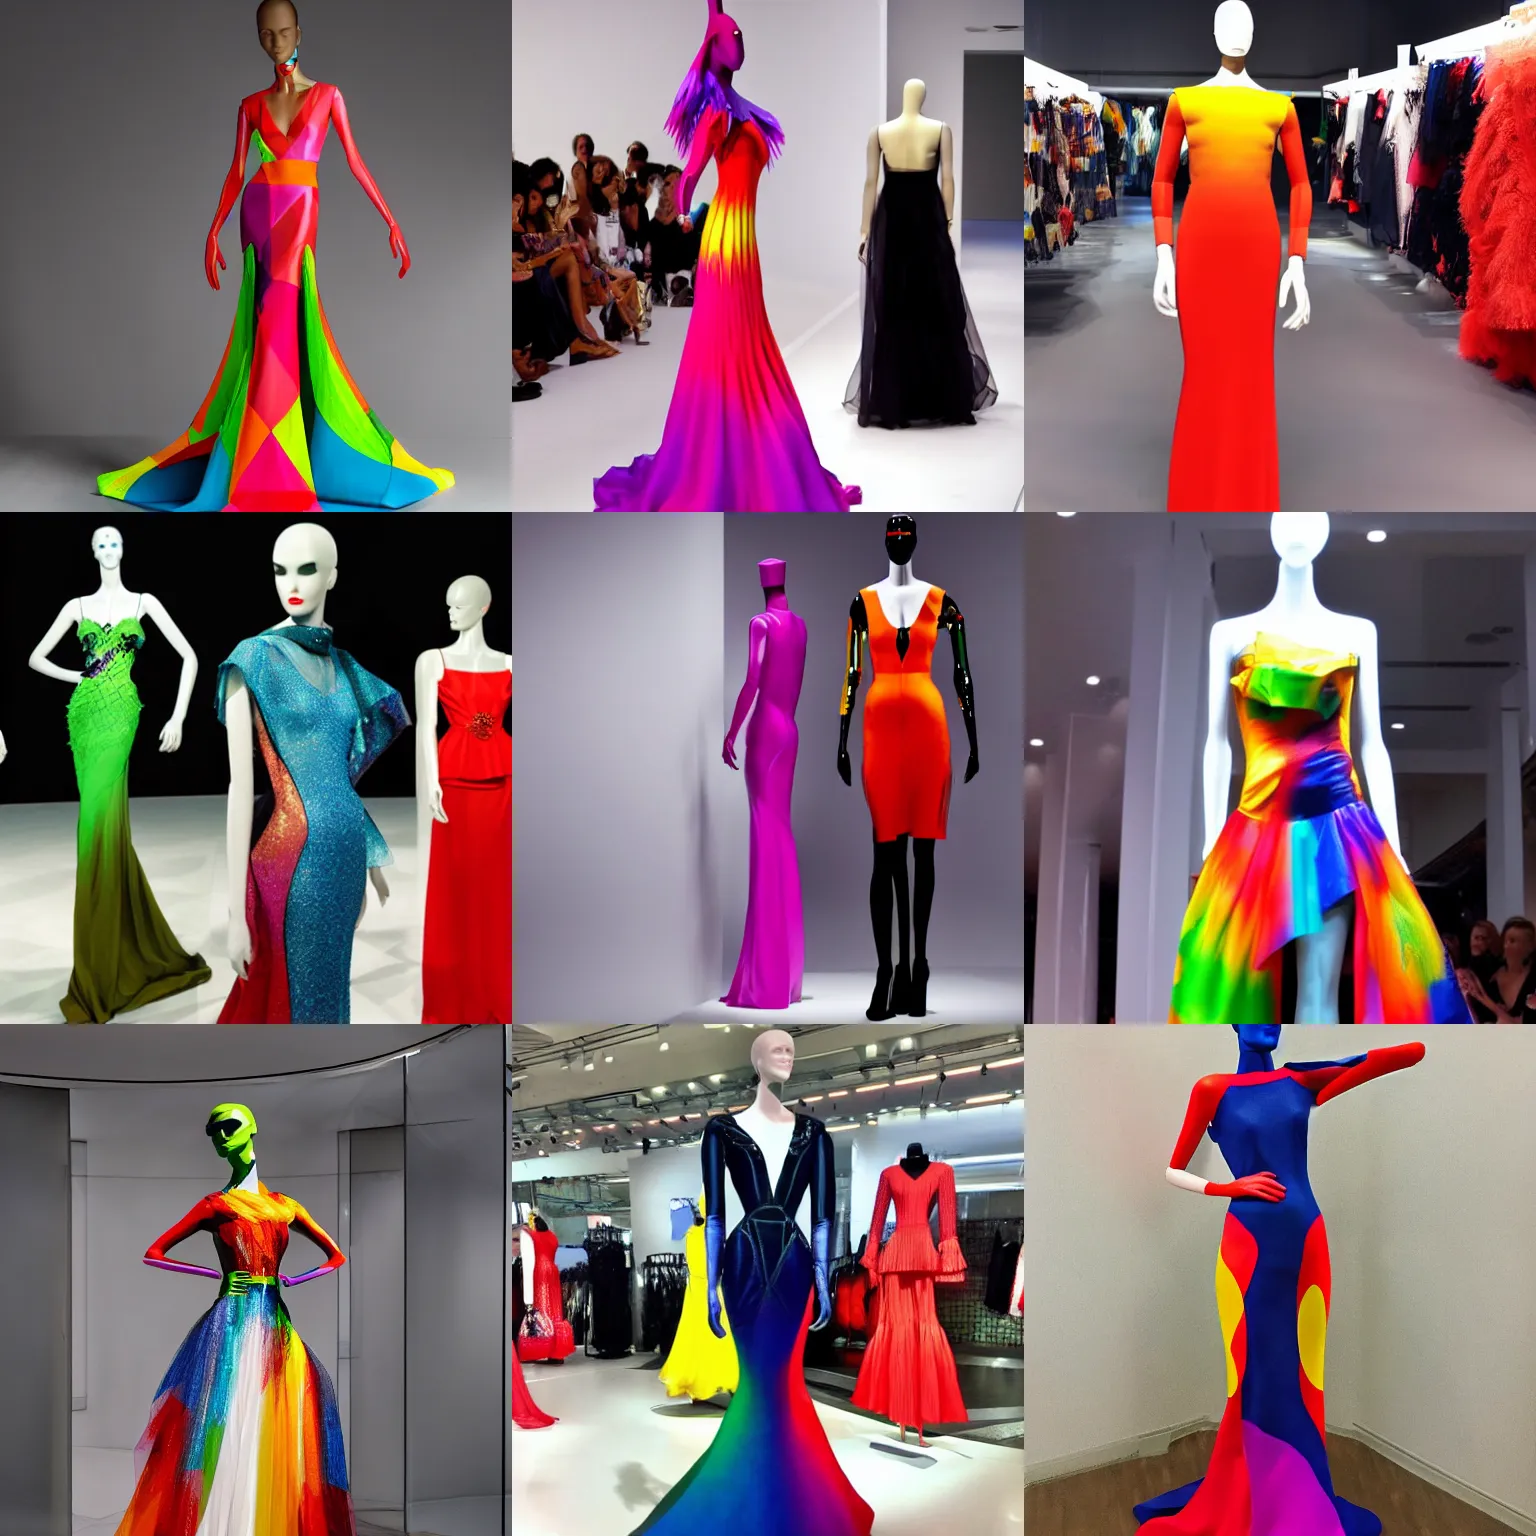 Prompt: a mannequin wearing a colorful gown in the style of mugler